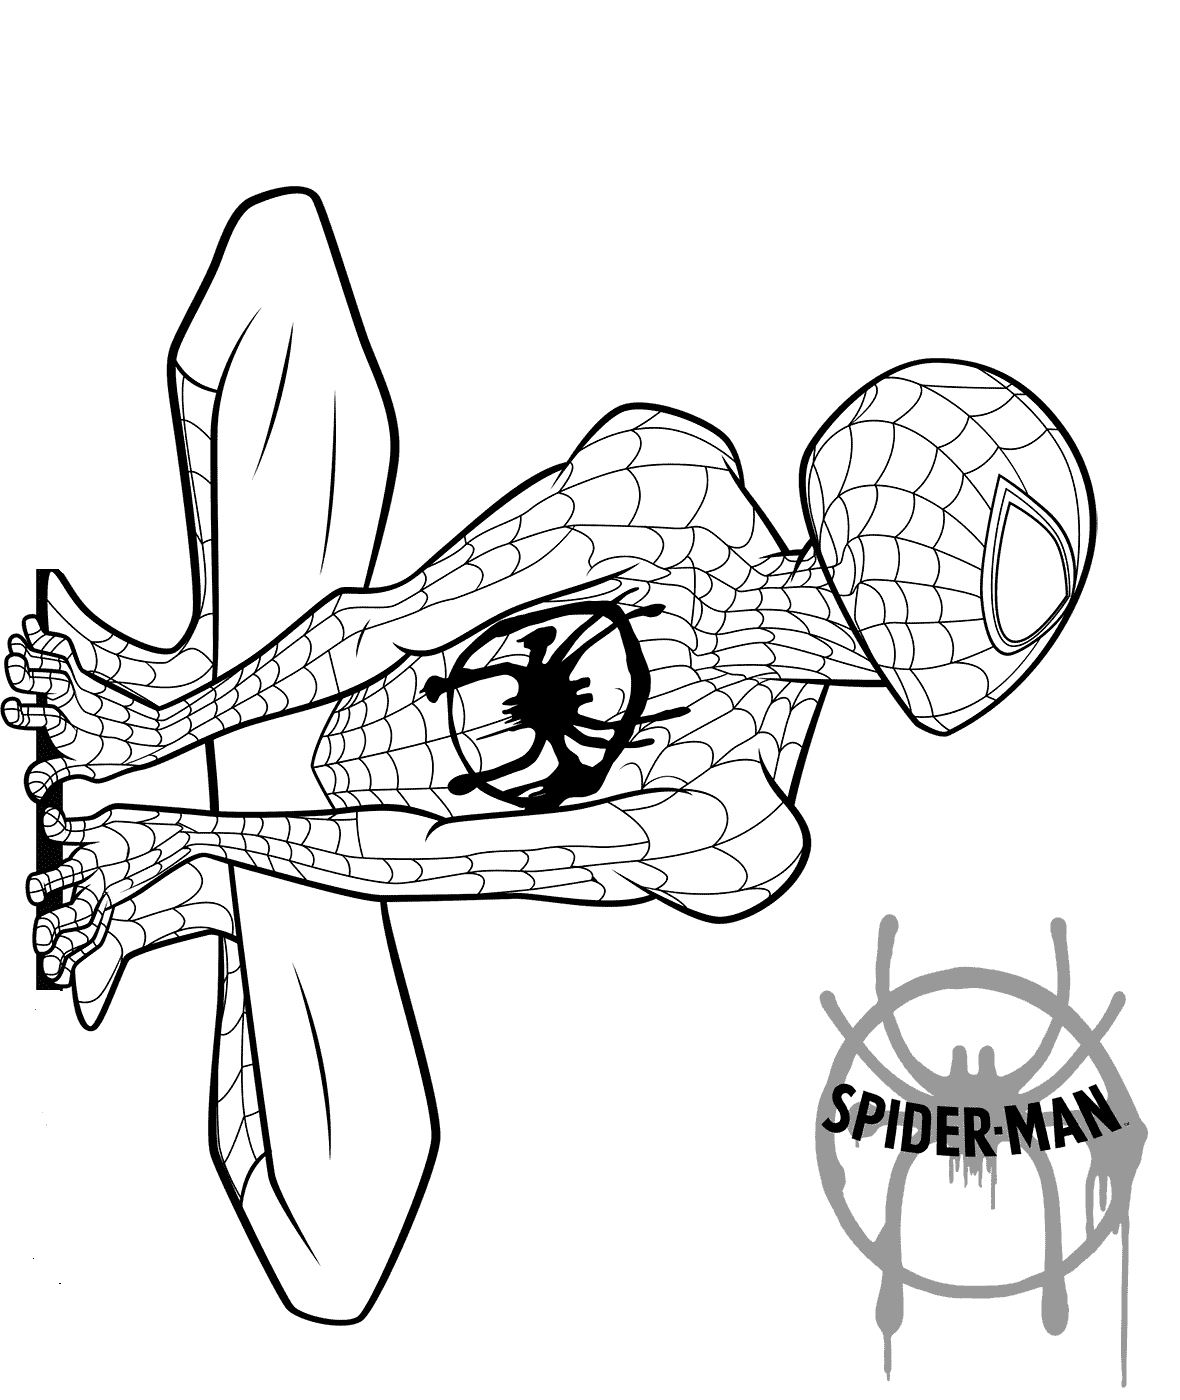 Spider Man Into The Spider Verse Coloring Page | Superman coloring pages,  Avengers coloring pages, Spider coloring page